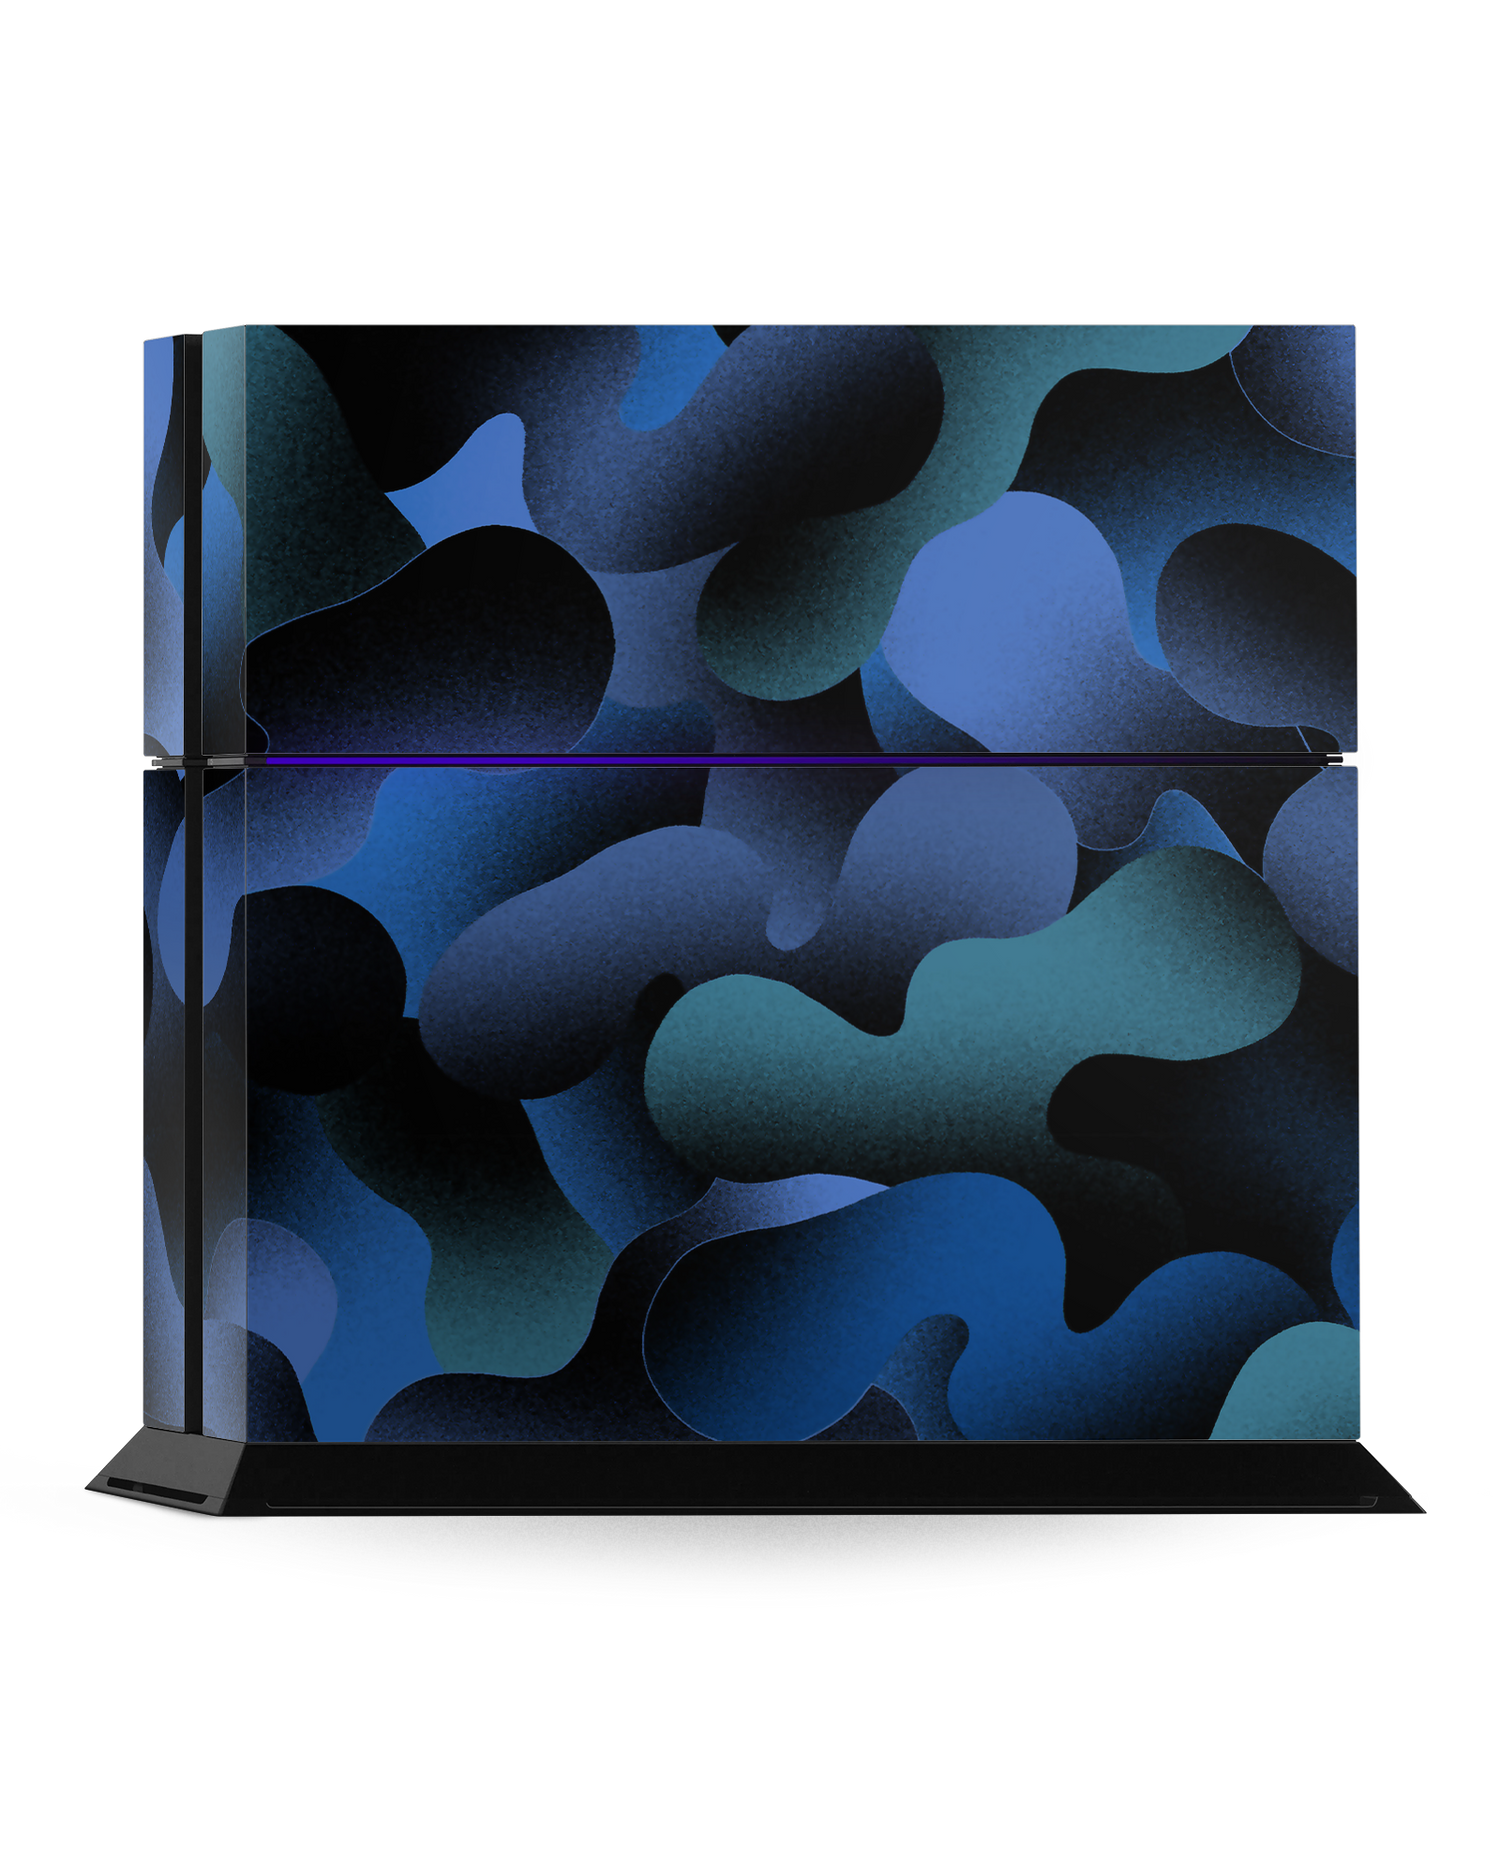 Night Moves Console Skin for Sony PlayStation 4: Standing